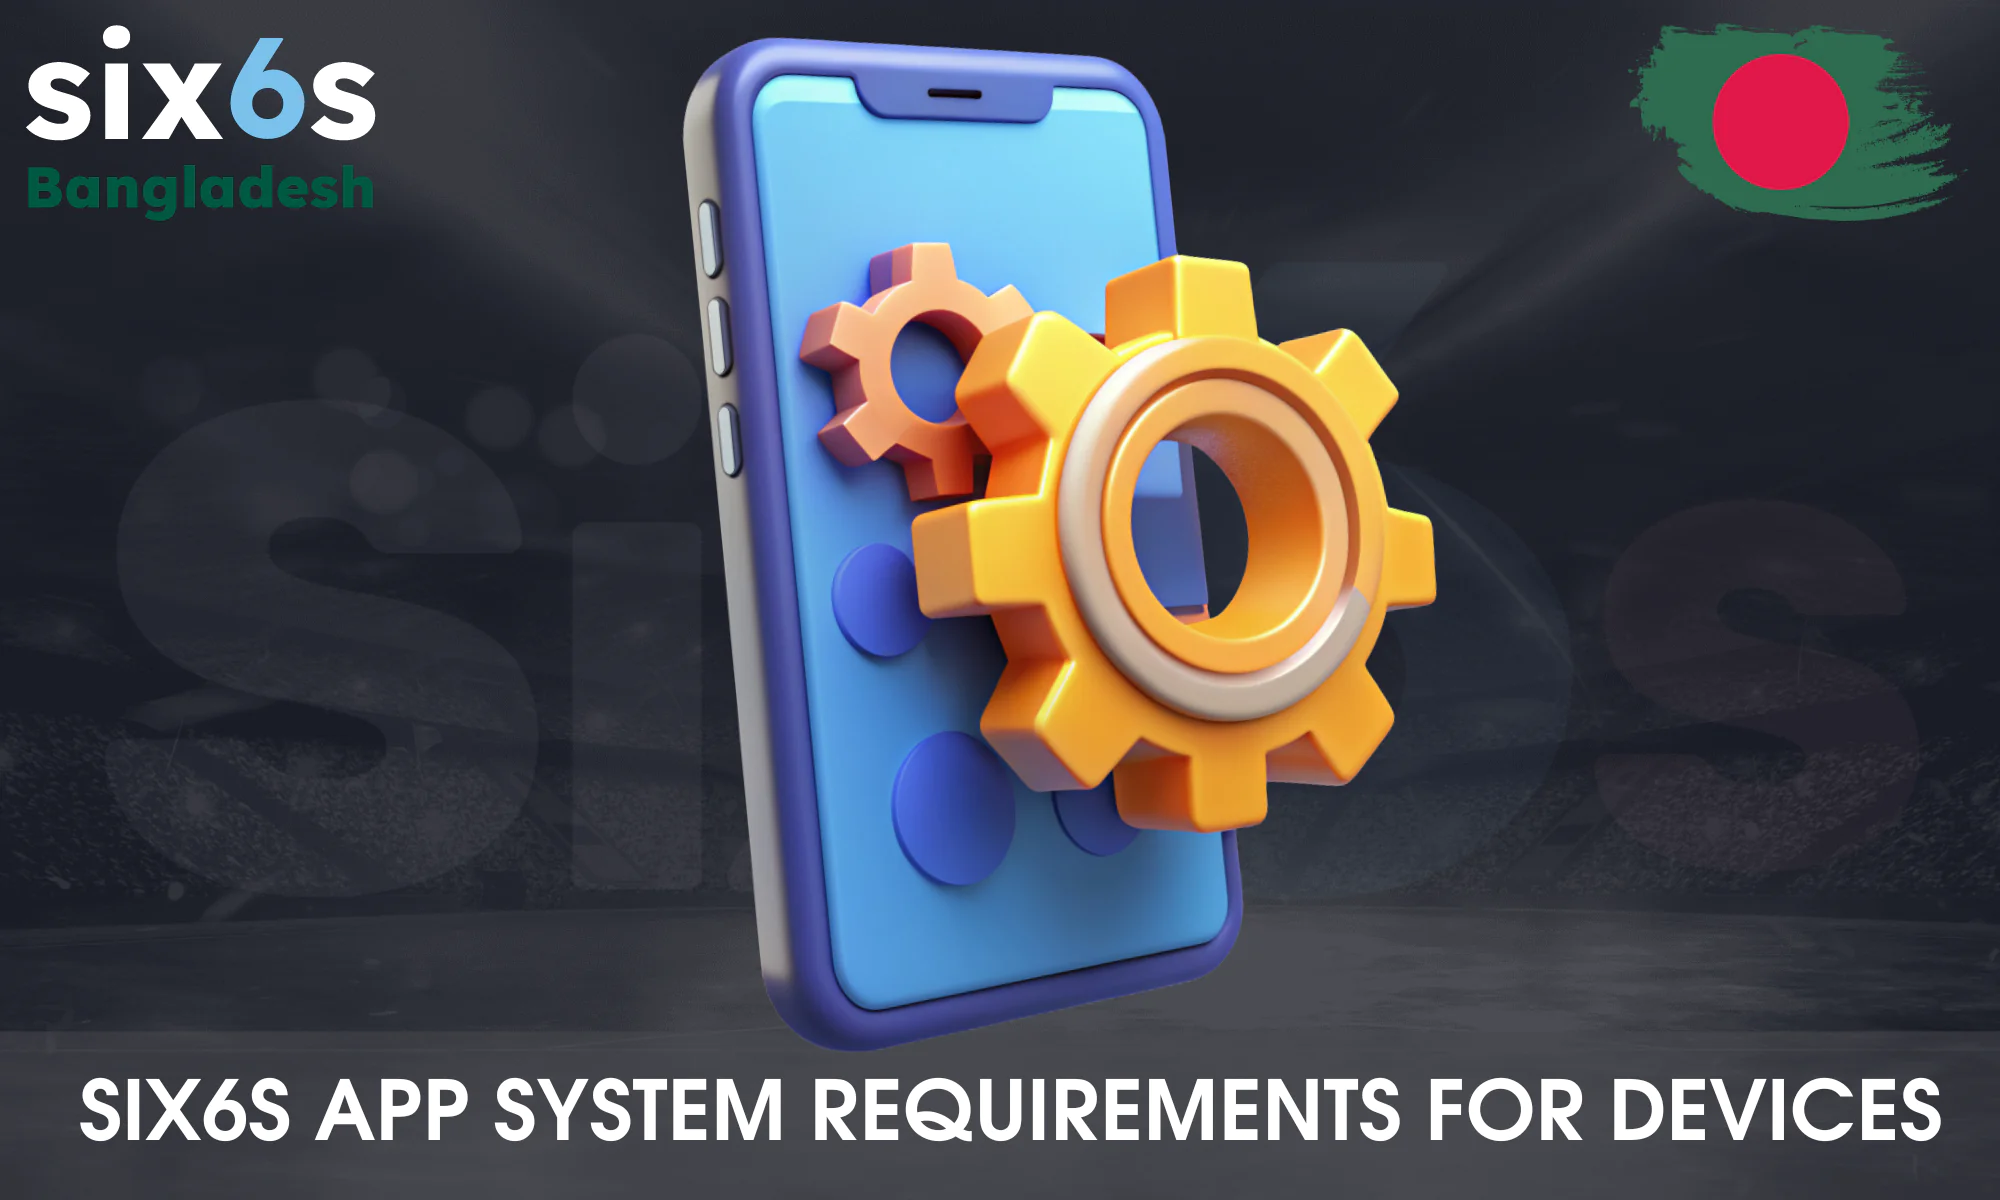 Six6s app system requirements to ensure smooth operation after download